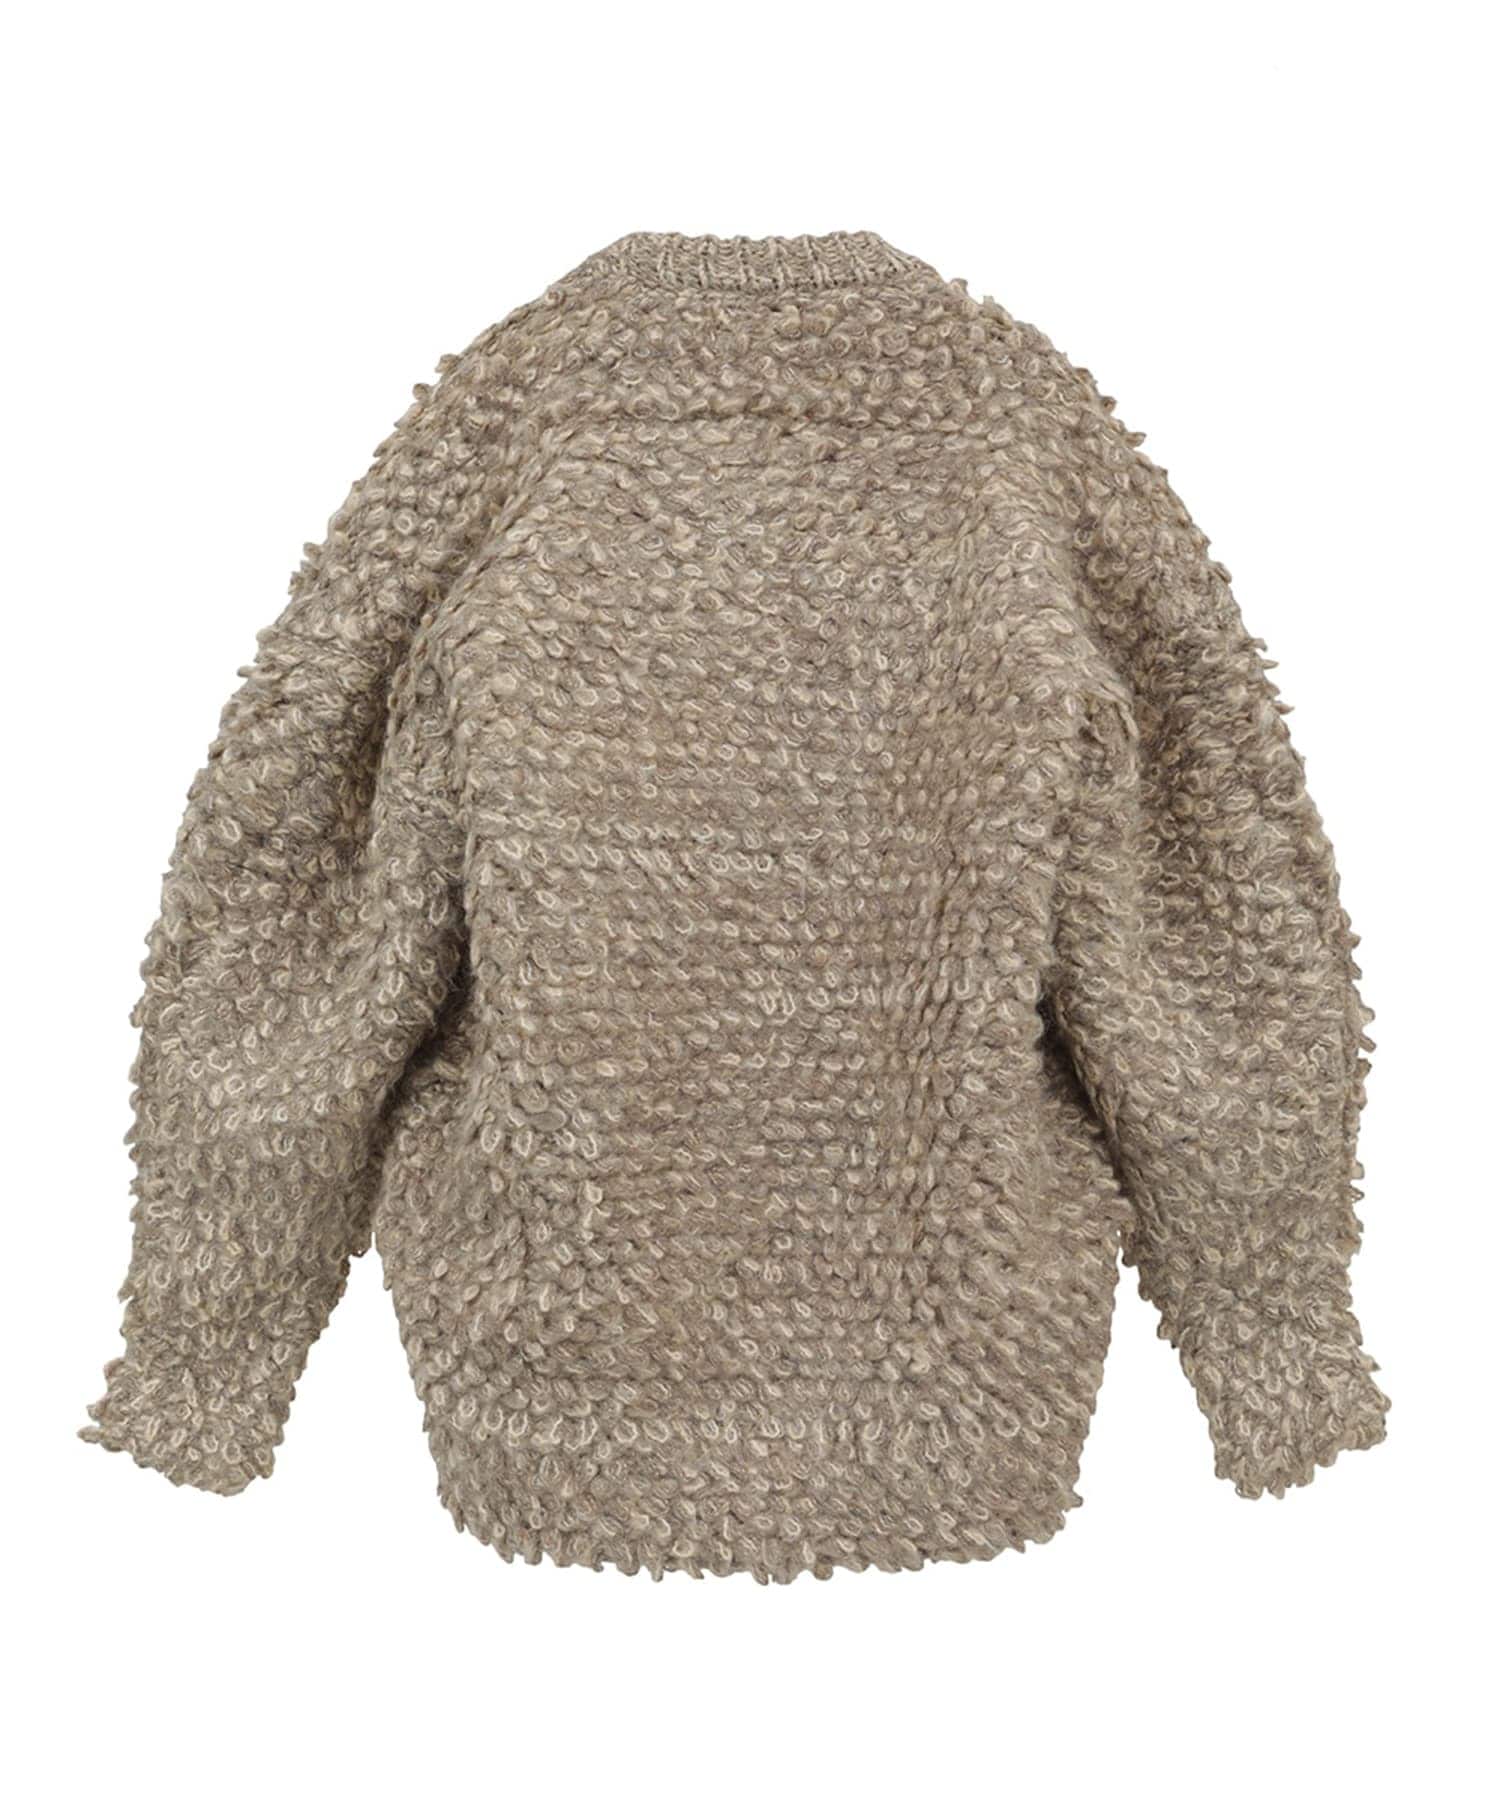 MIX LOOP MOHAIR KNIT TOPS CLANE